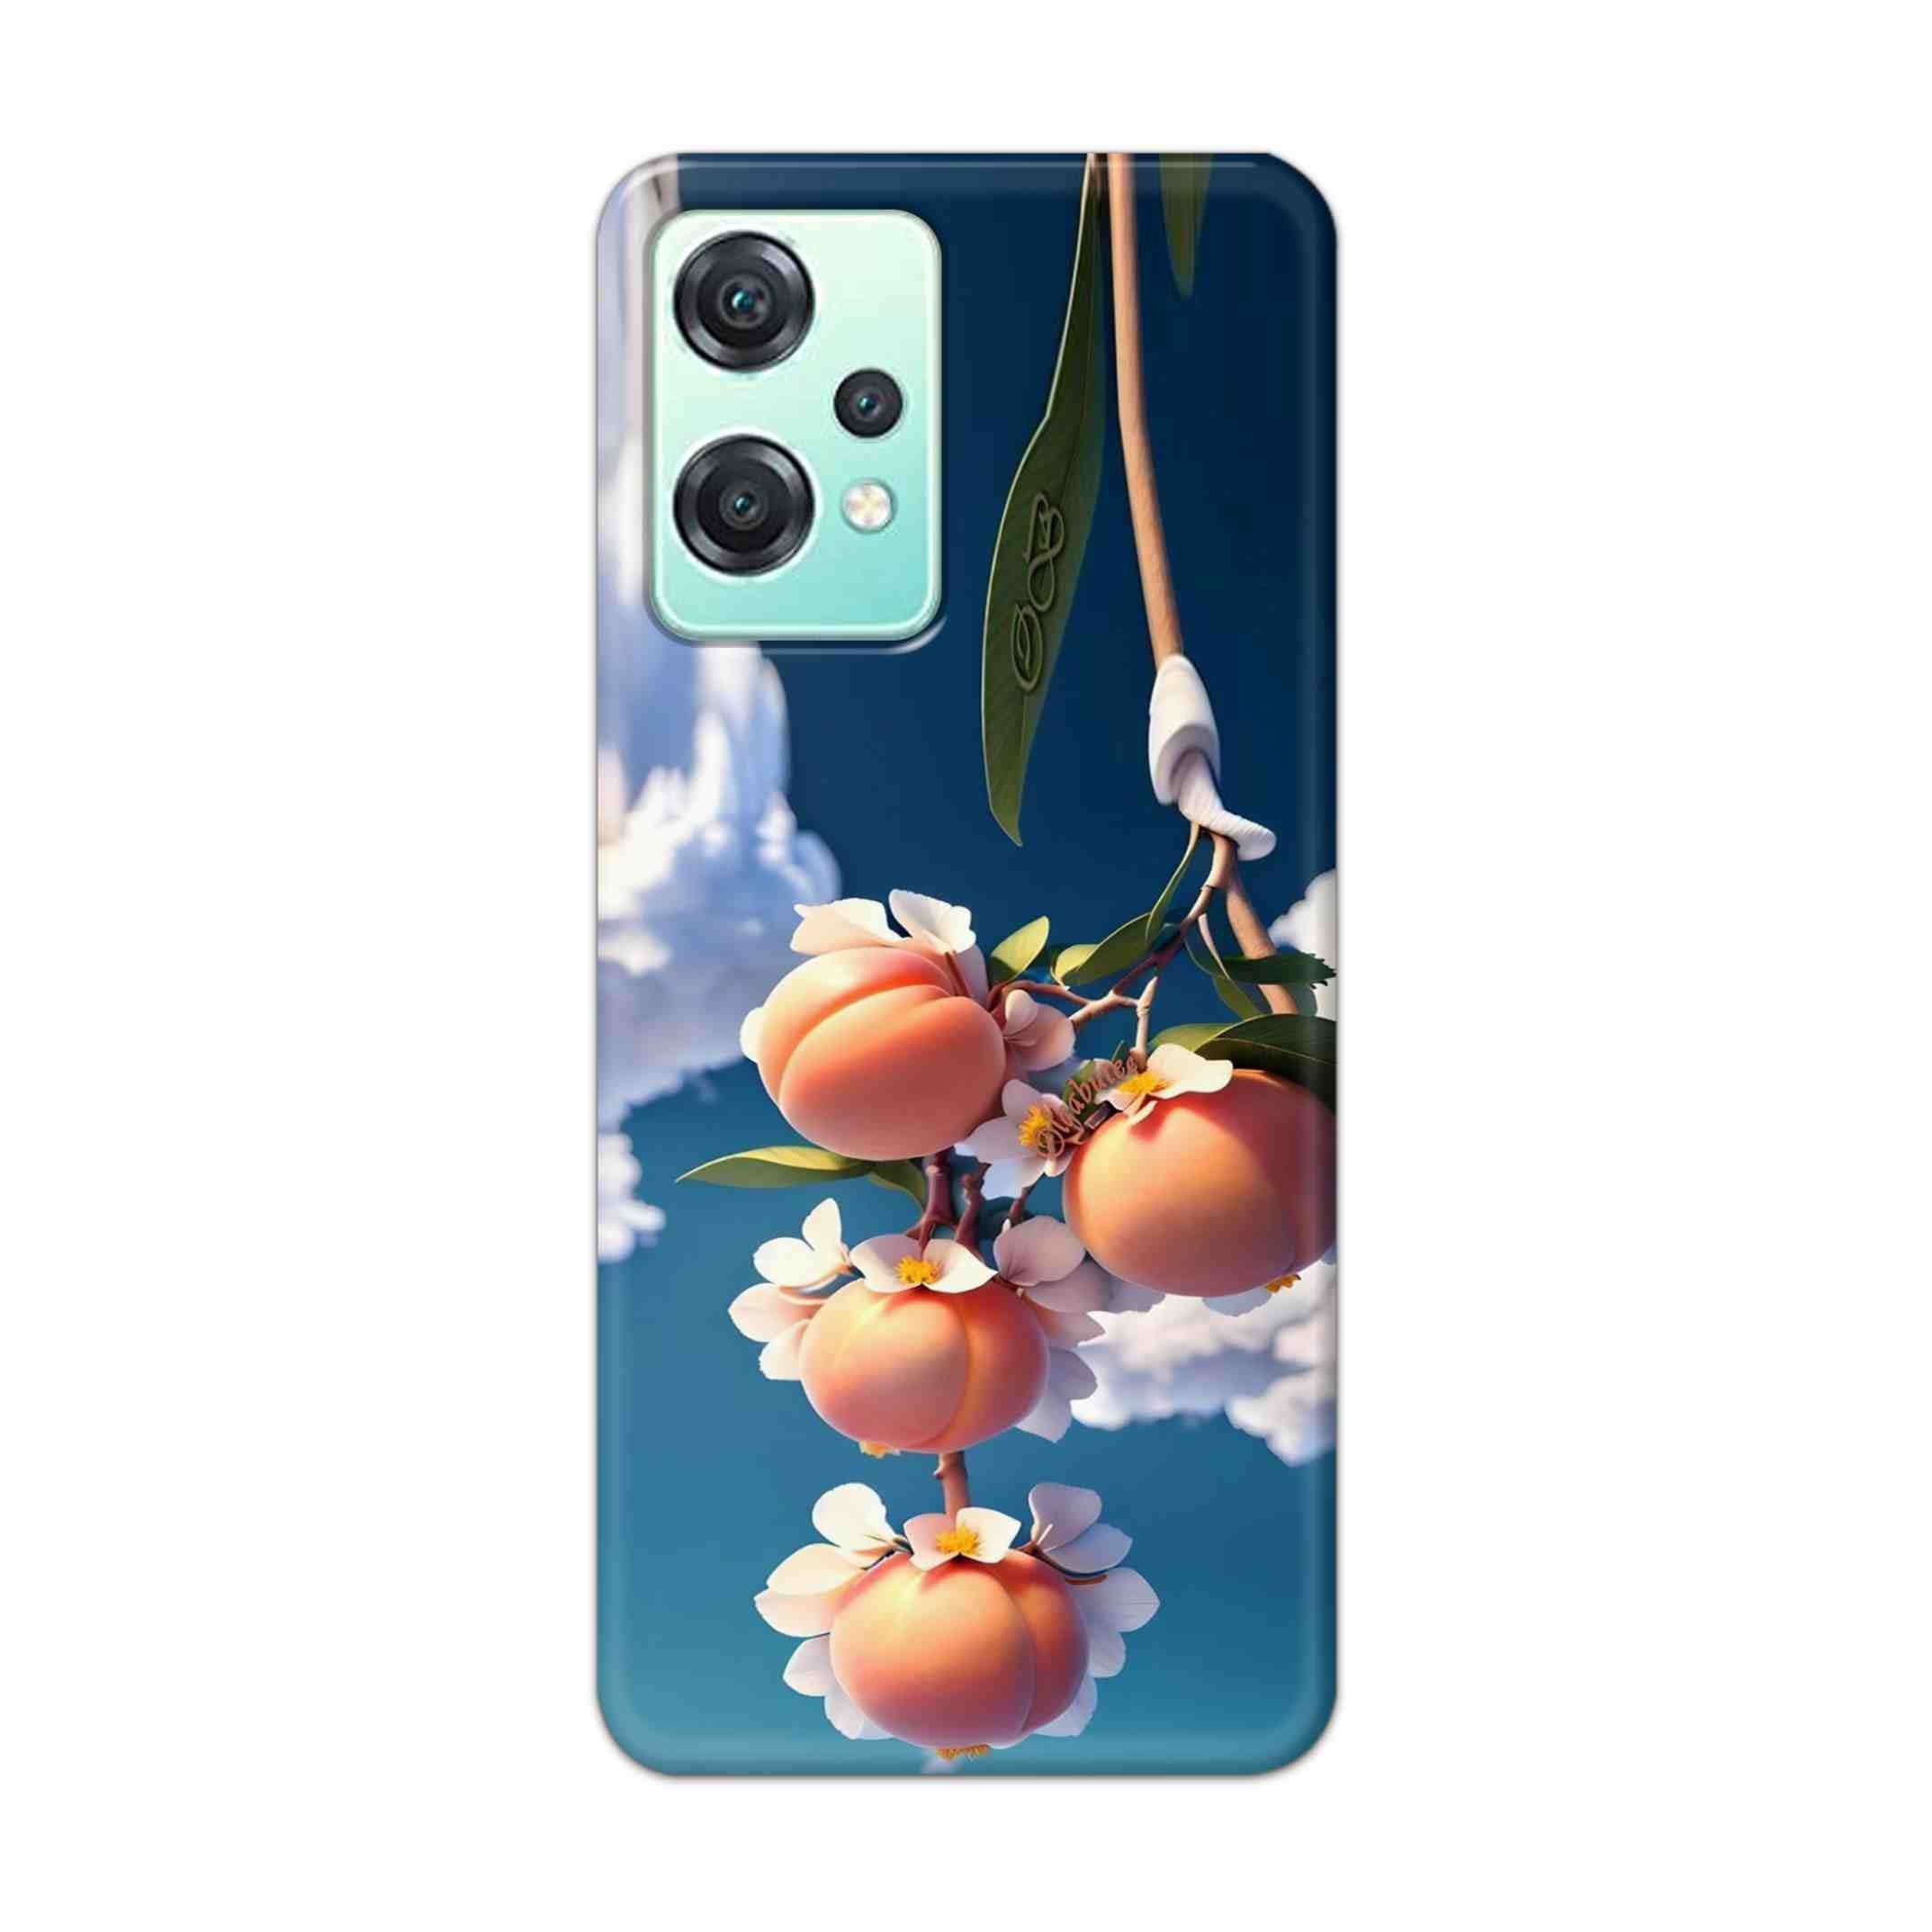 Buy Fruit Hard Back Mobile Phone Case Cover For OnePlus Nord CE 2 Lite 5G Online